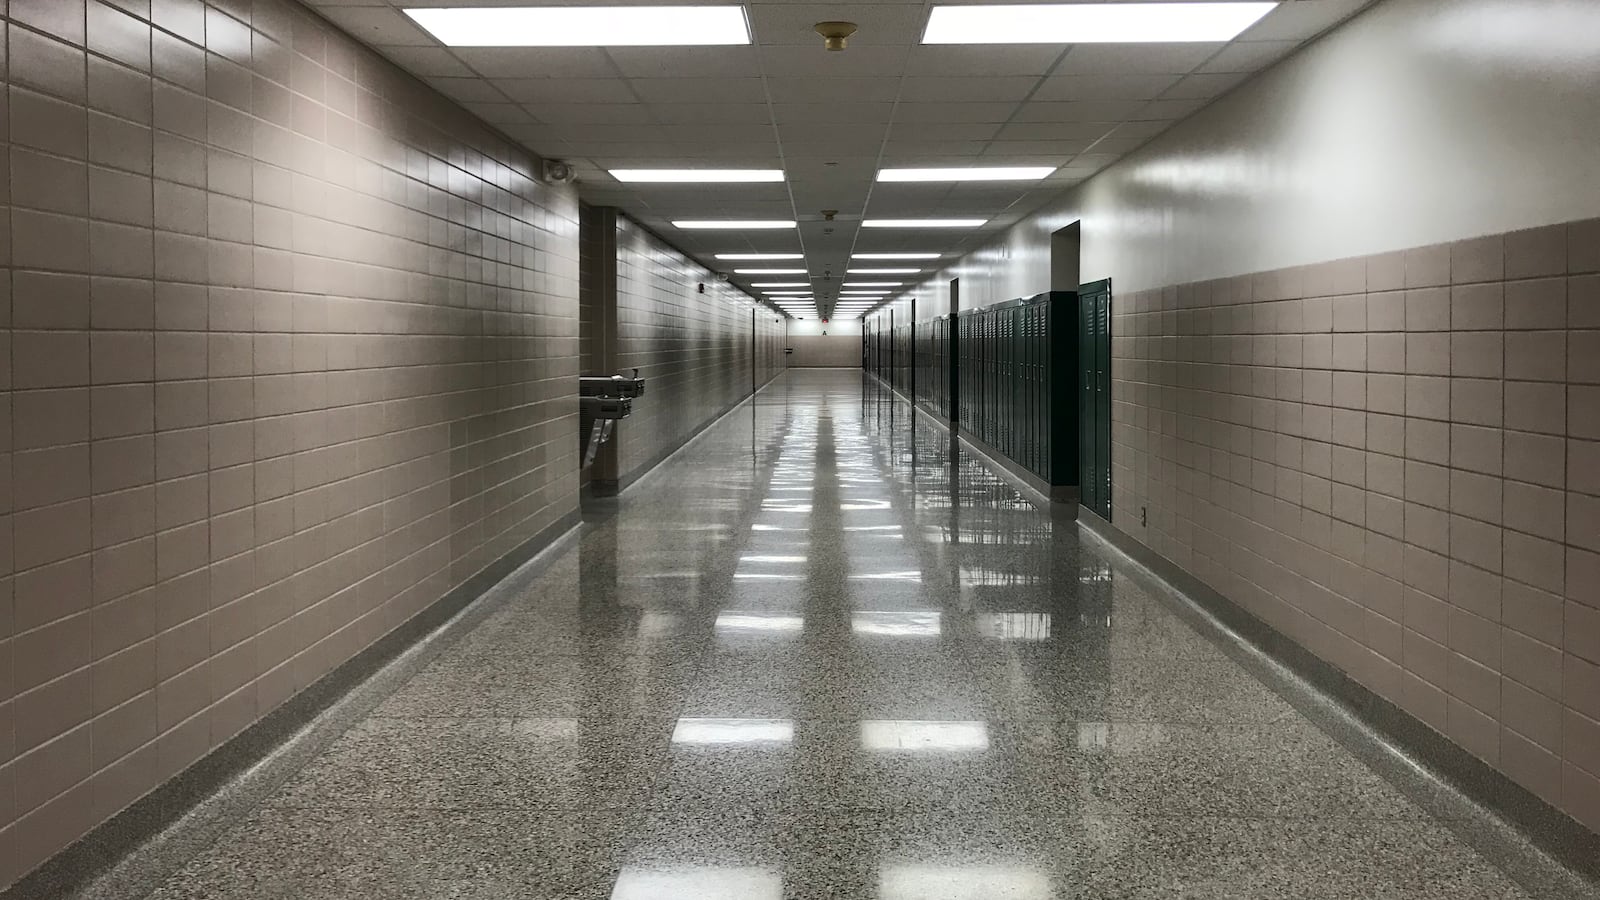 Hallways at Arlington High School are empty after the last day of school in 2018.